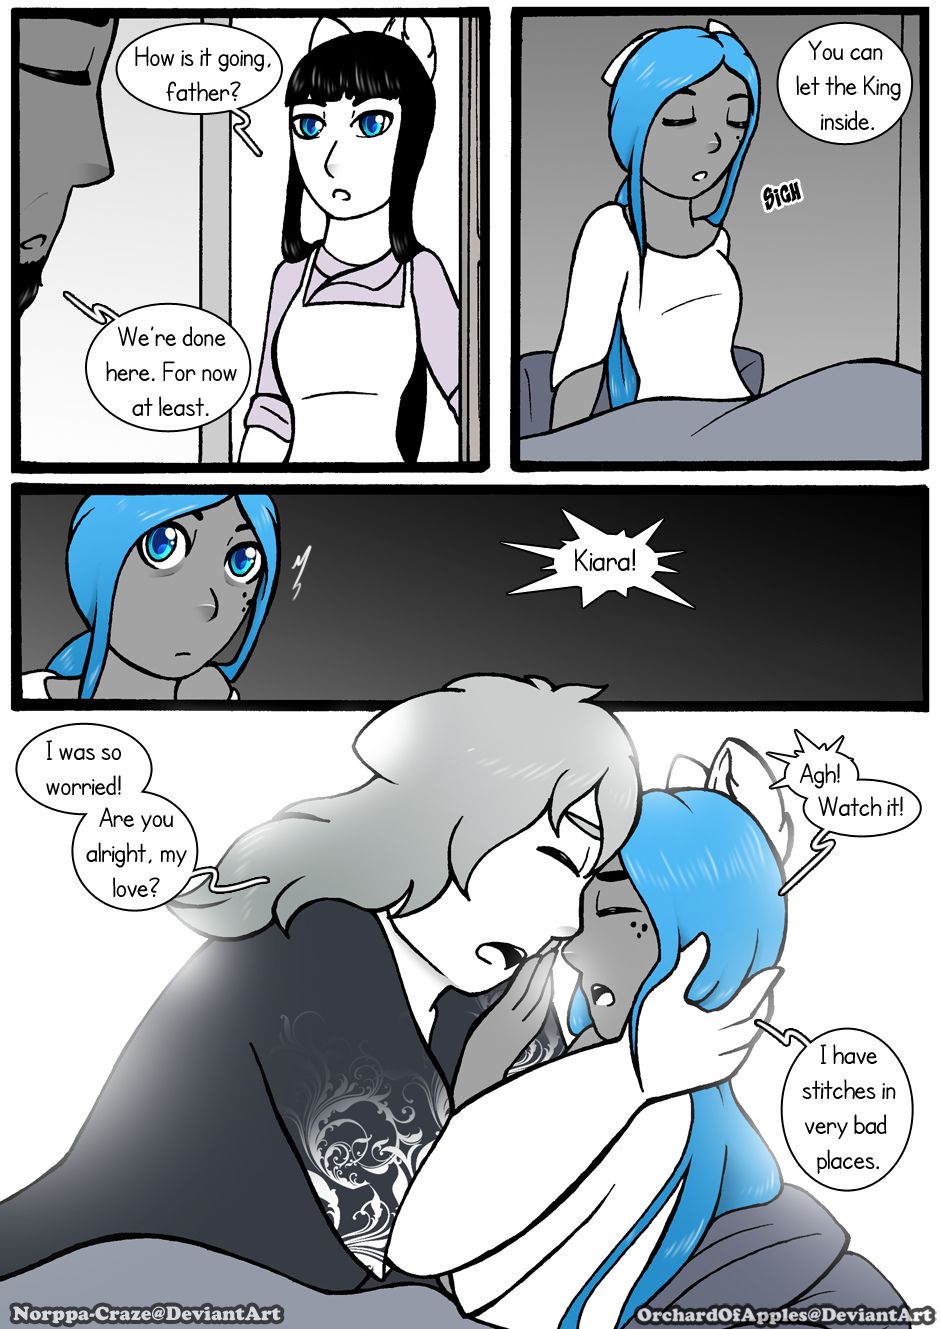 [Jeny-jen94] Between Kings and Queens [Ongoing] 332